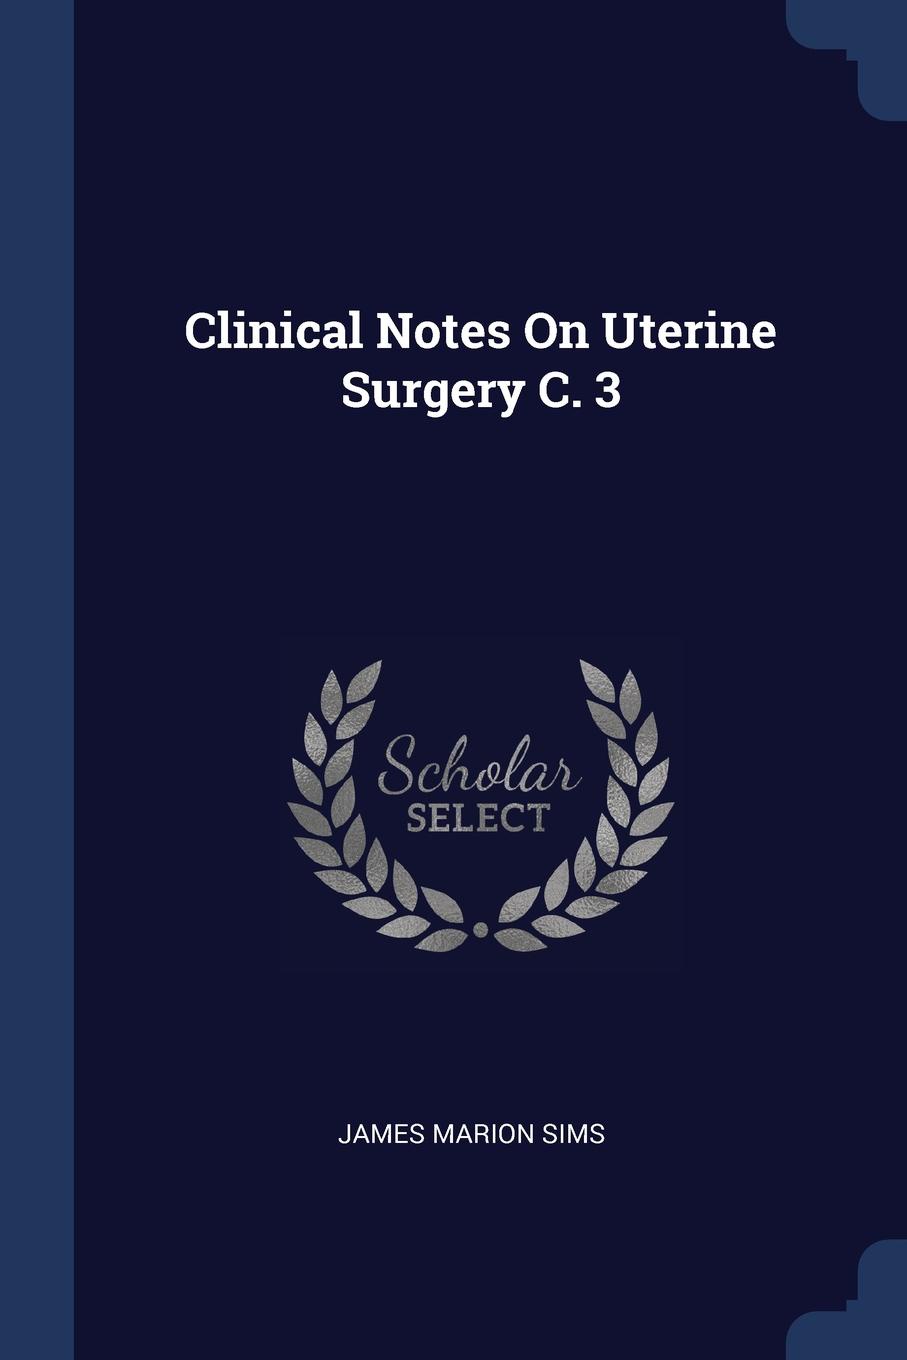 Clinical Notes On Uterine Surgery C. 3